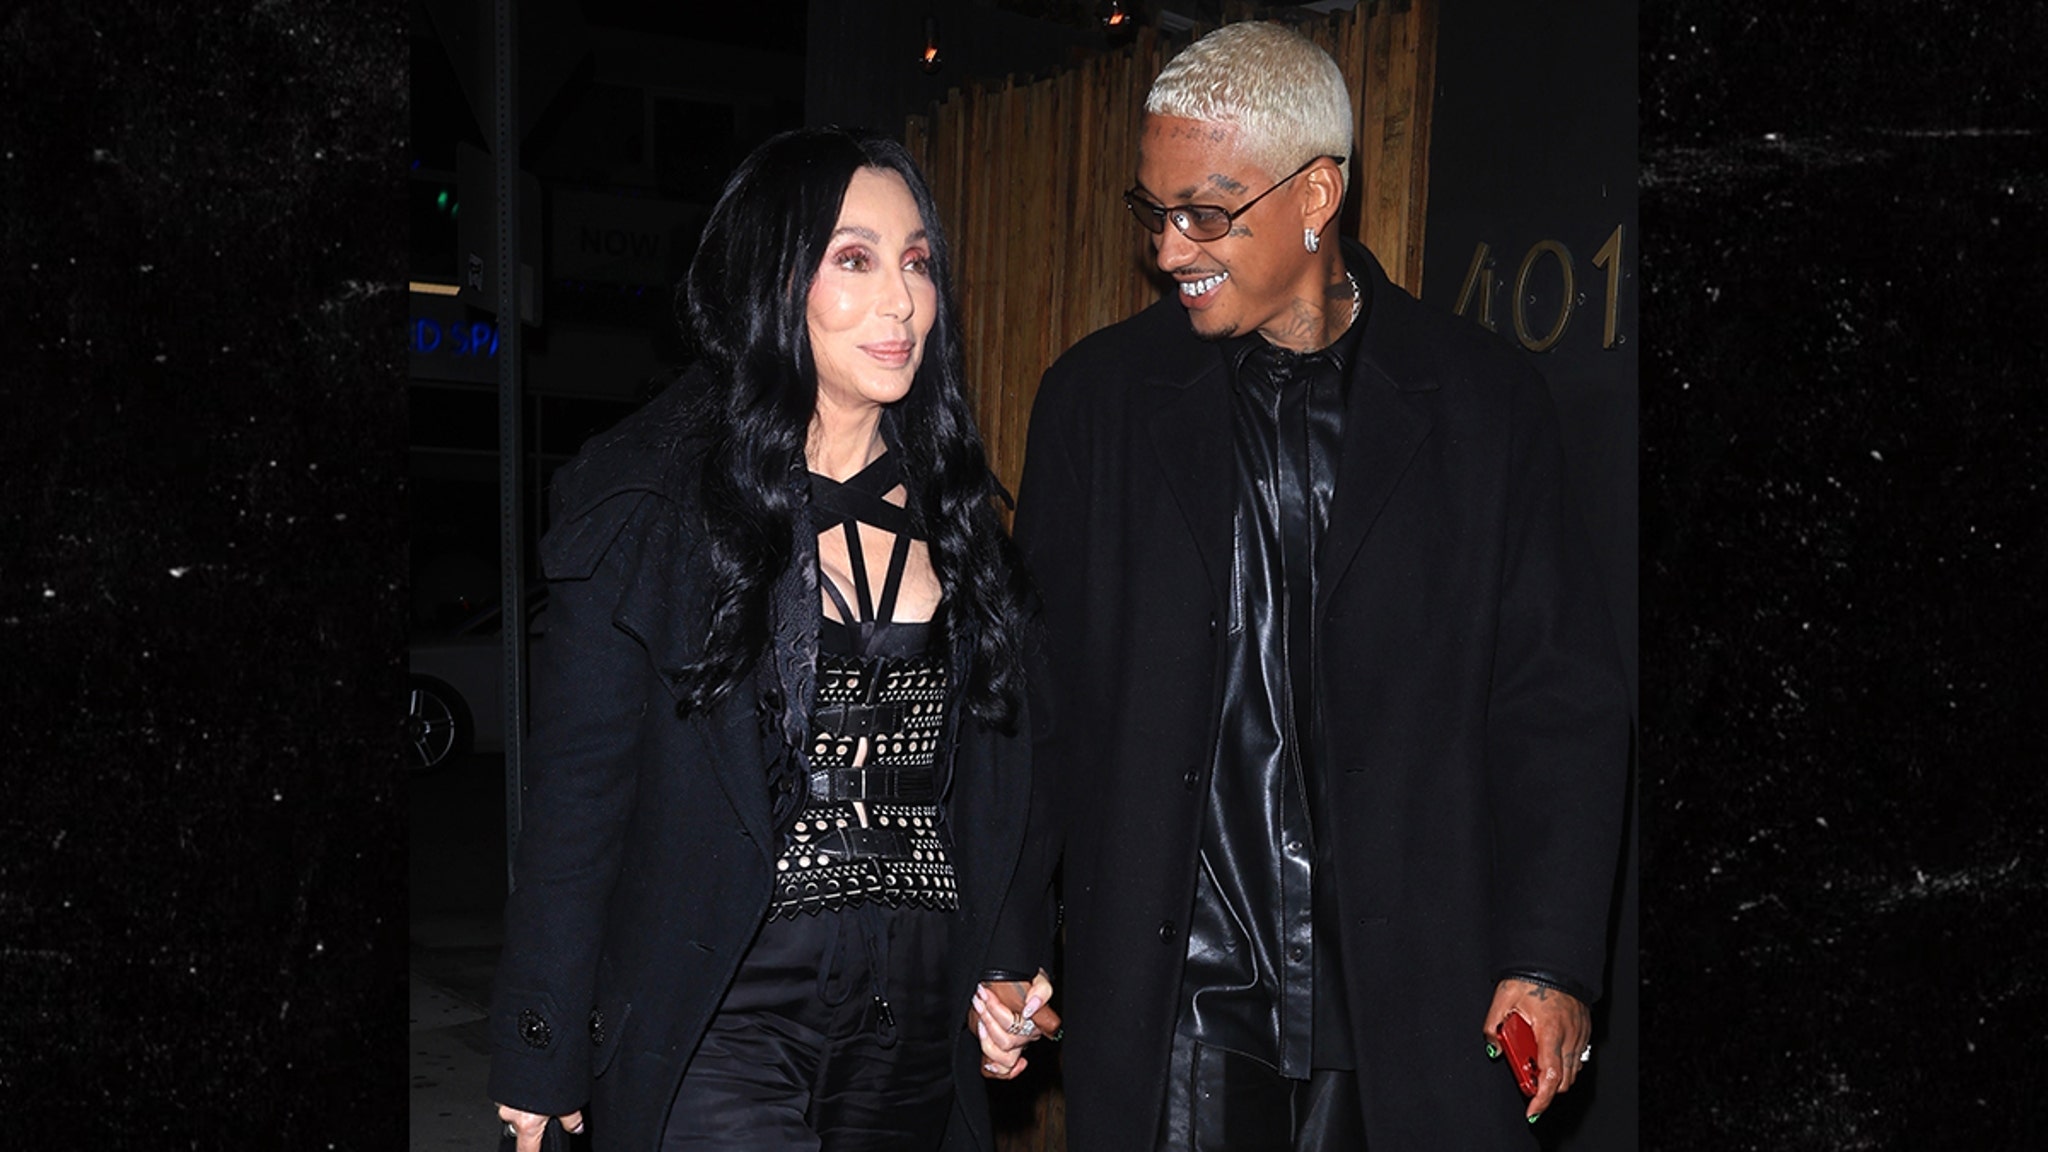 Cher and Alexander Edwards Hold Hands, Leave together, After Partying with Tyga